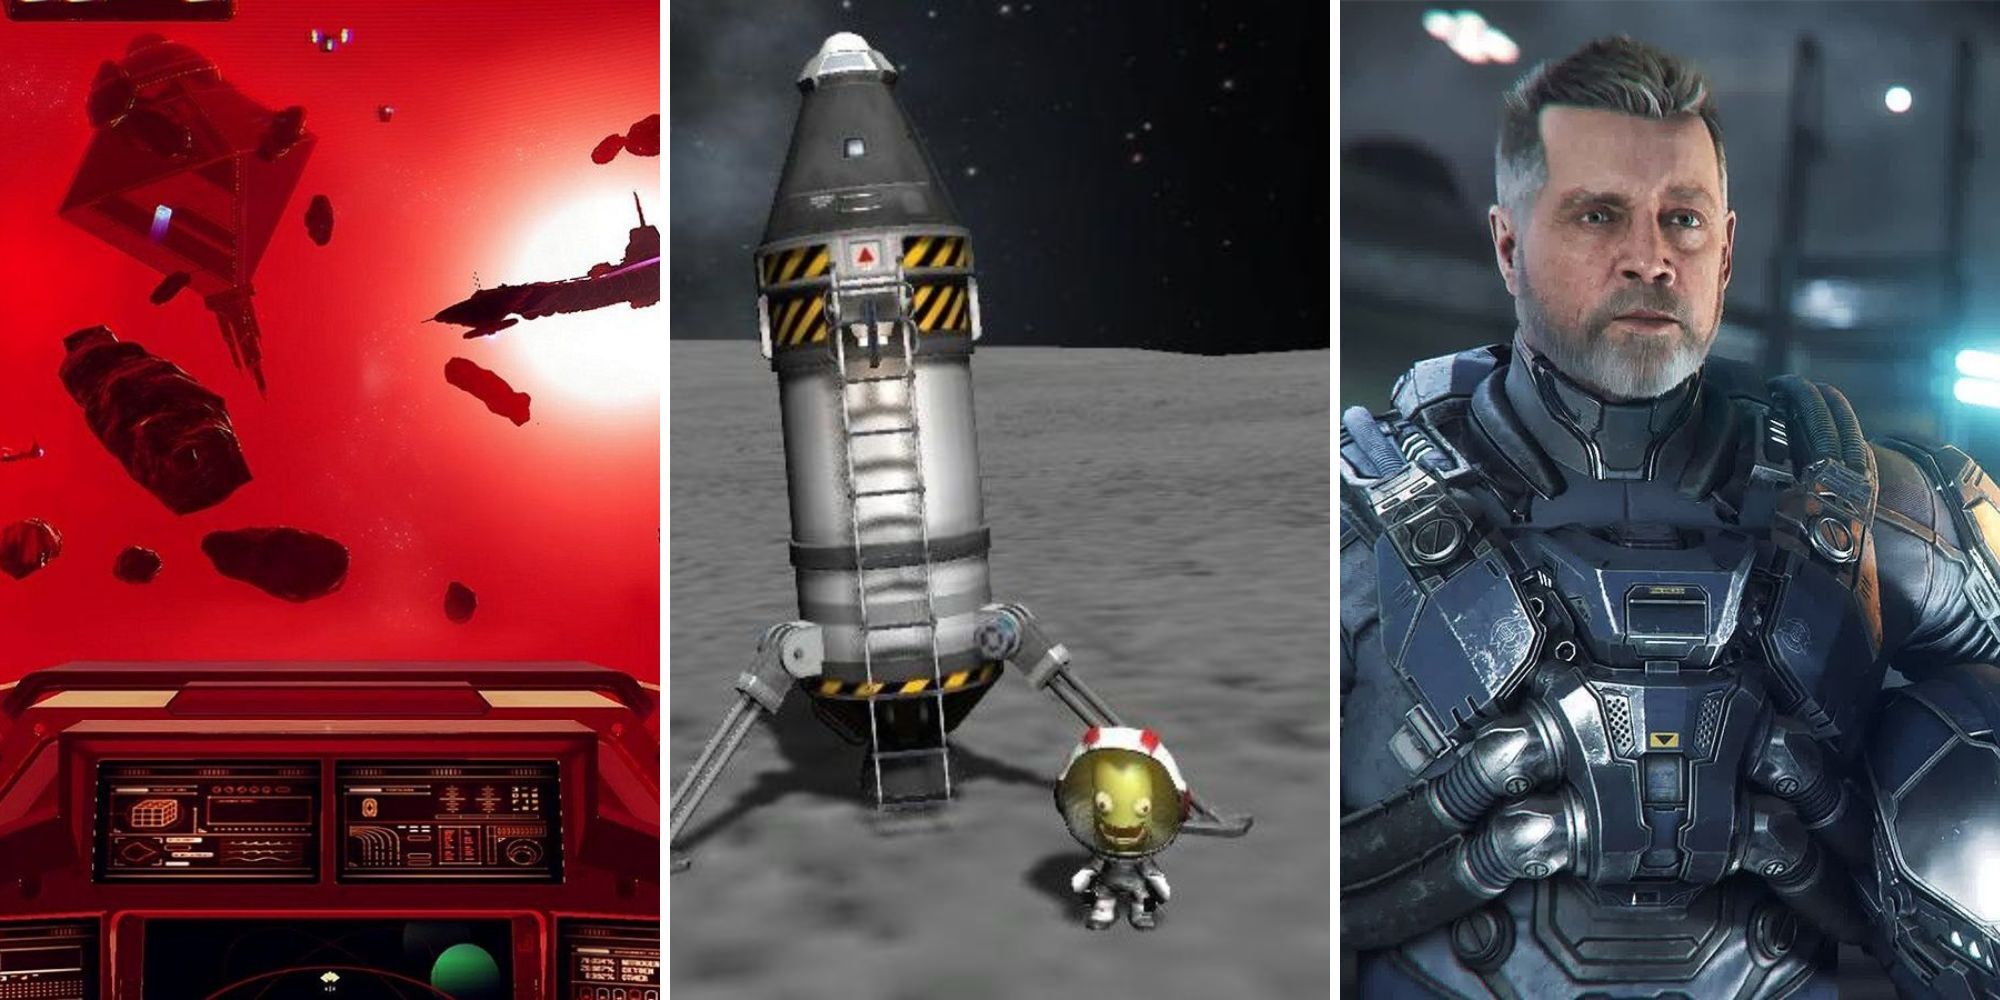 A grid showing pictures of three Sci-Fi games including No Man's Sky, Kerbal Space Program and Star Citizen